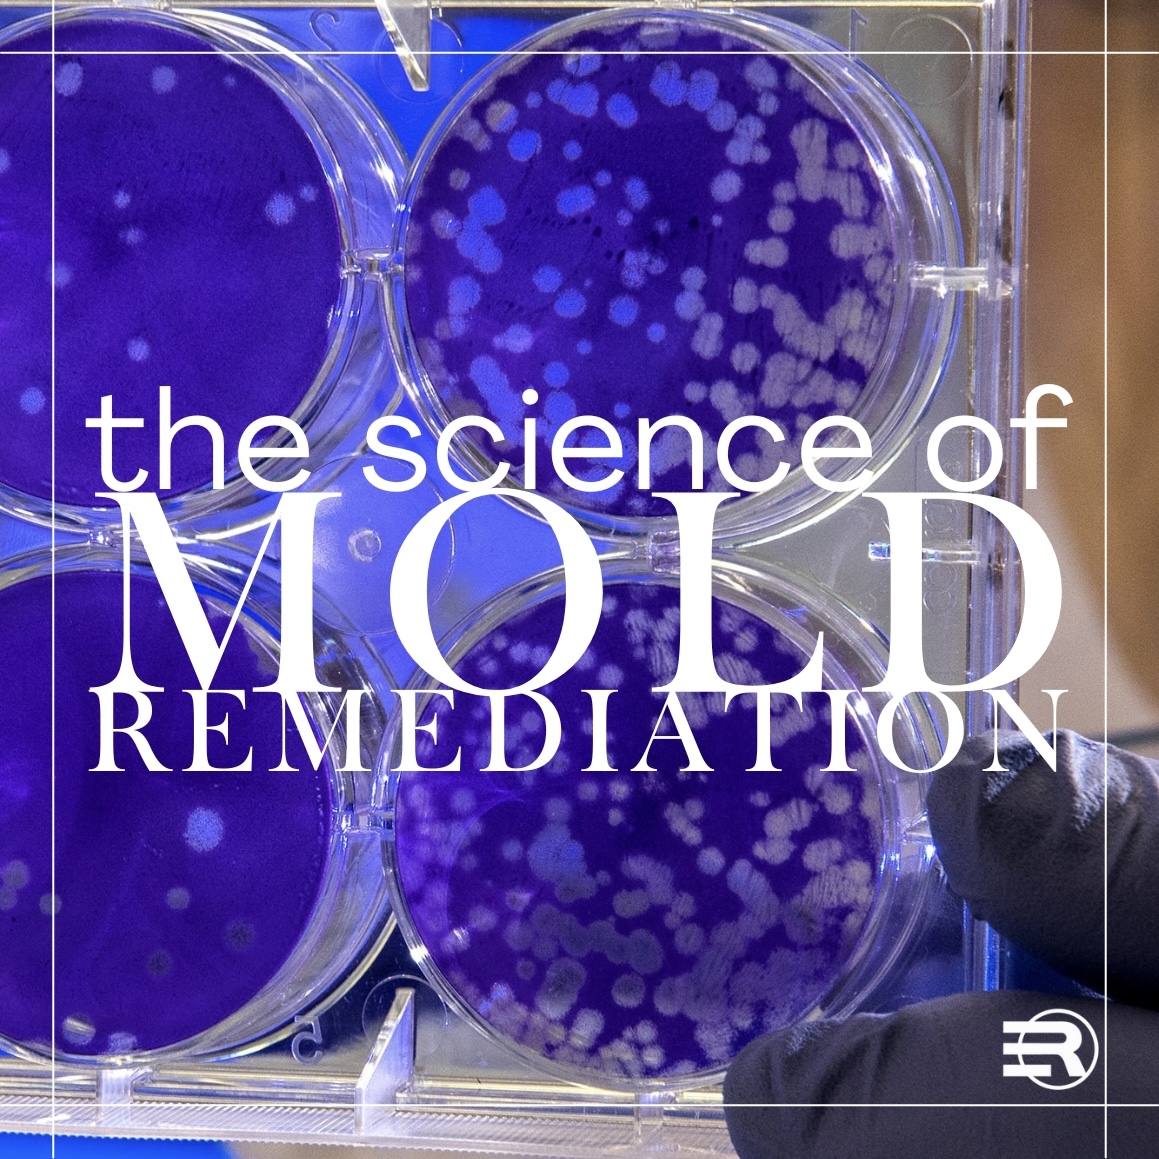 The science behind mold remediation